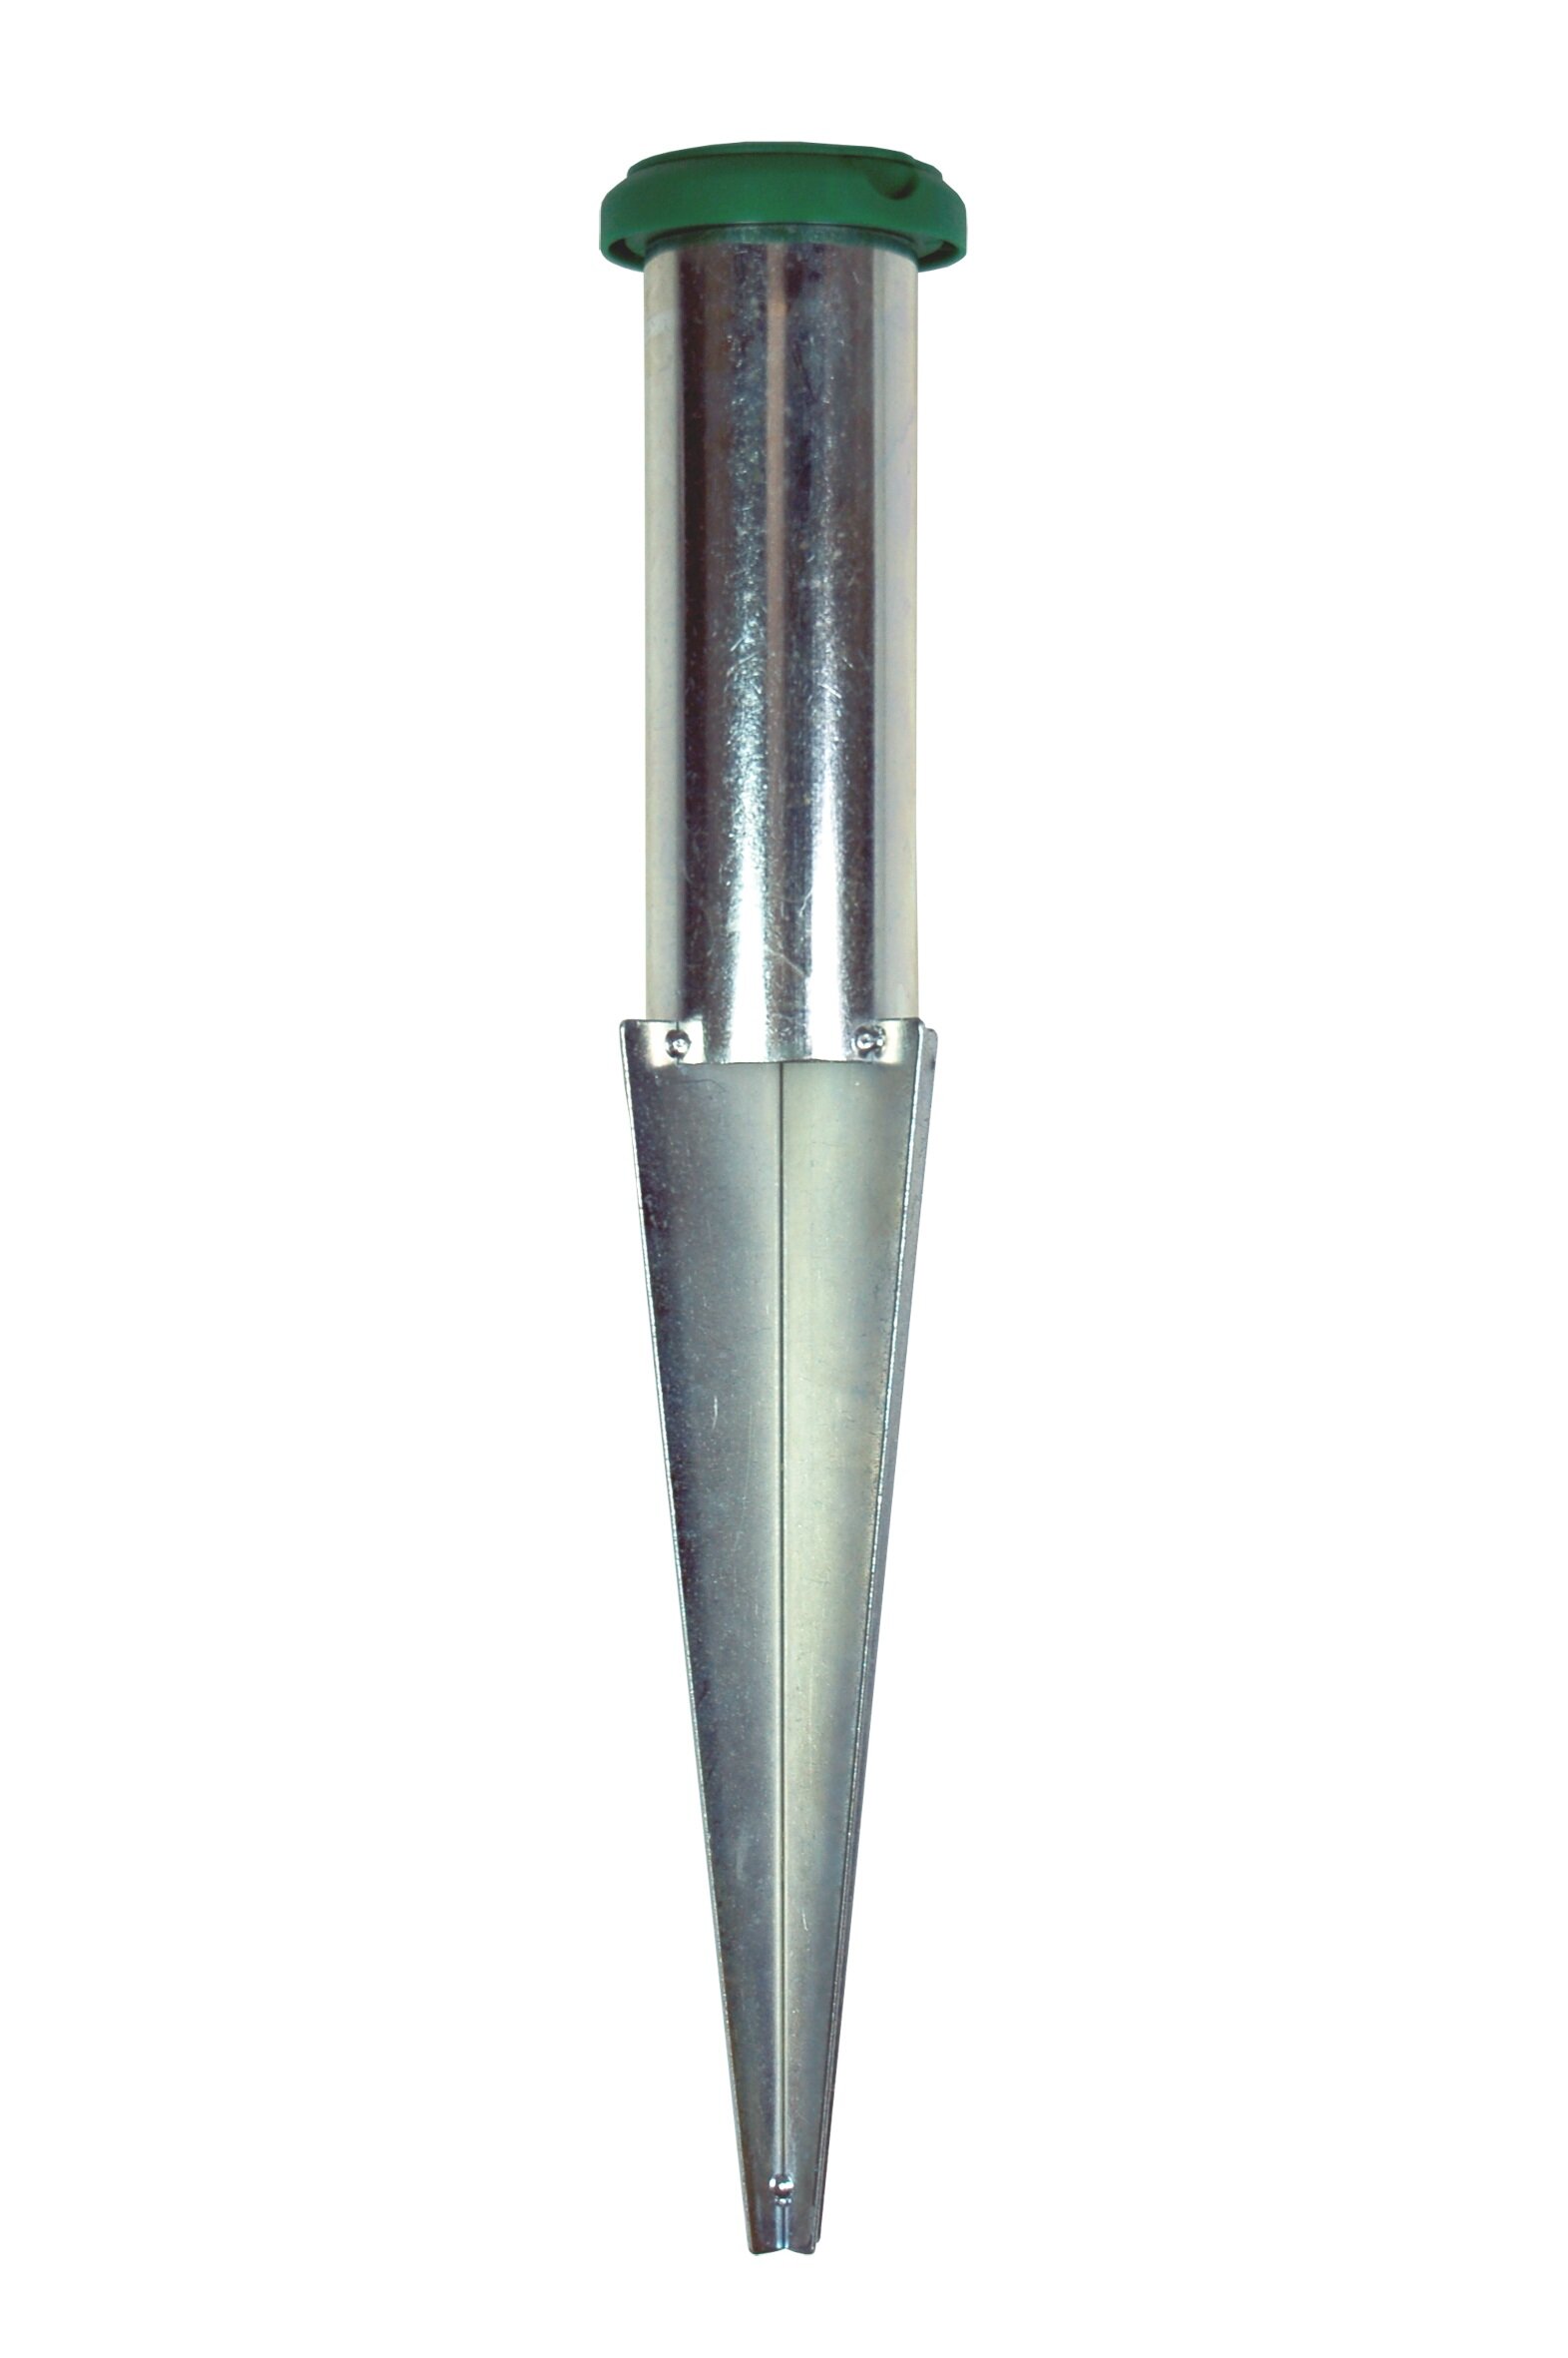 Multi Fit Rotary Airer Ground Spike 